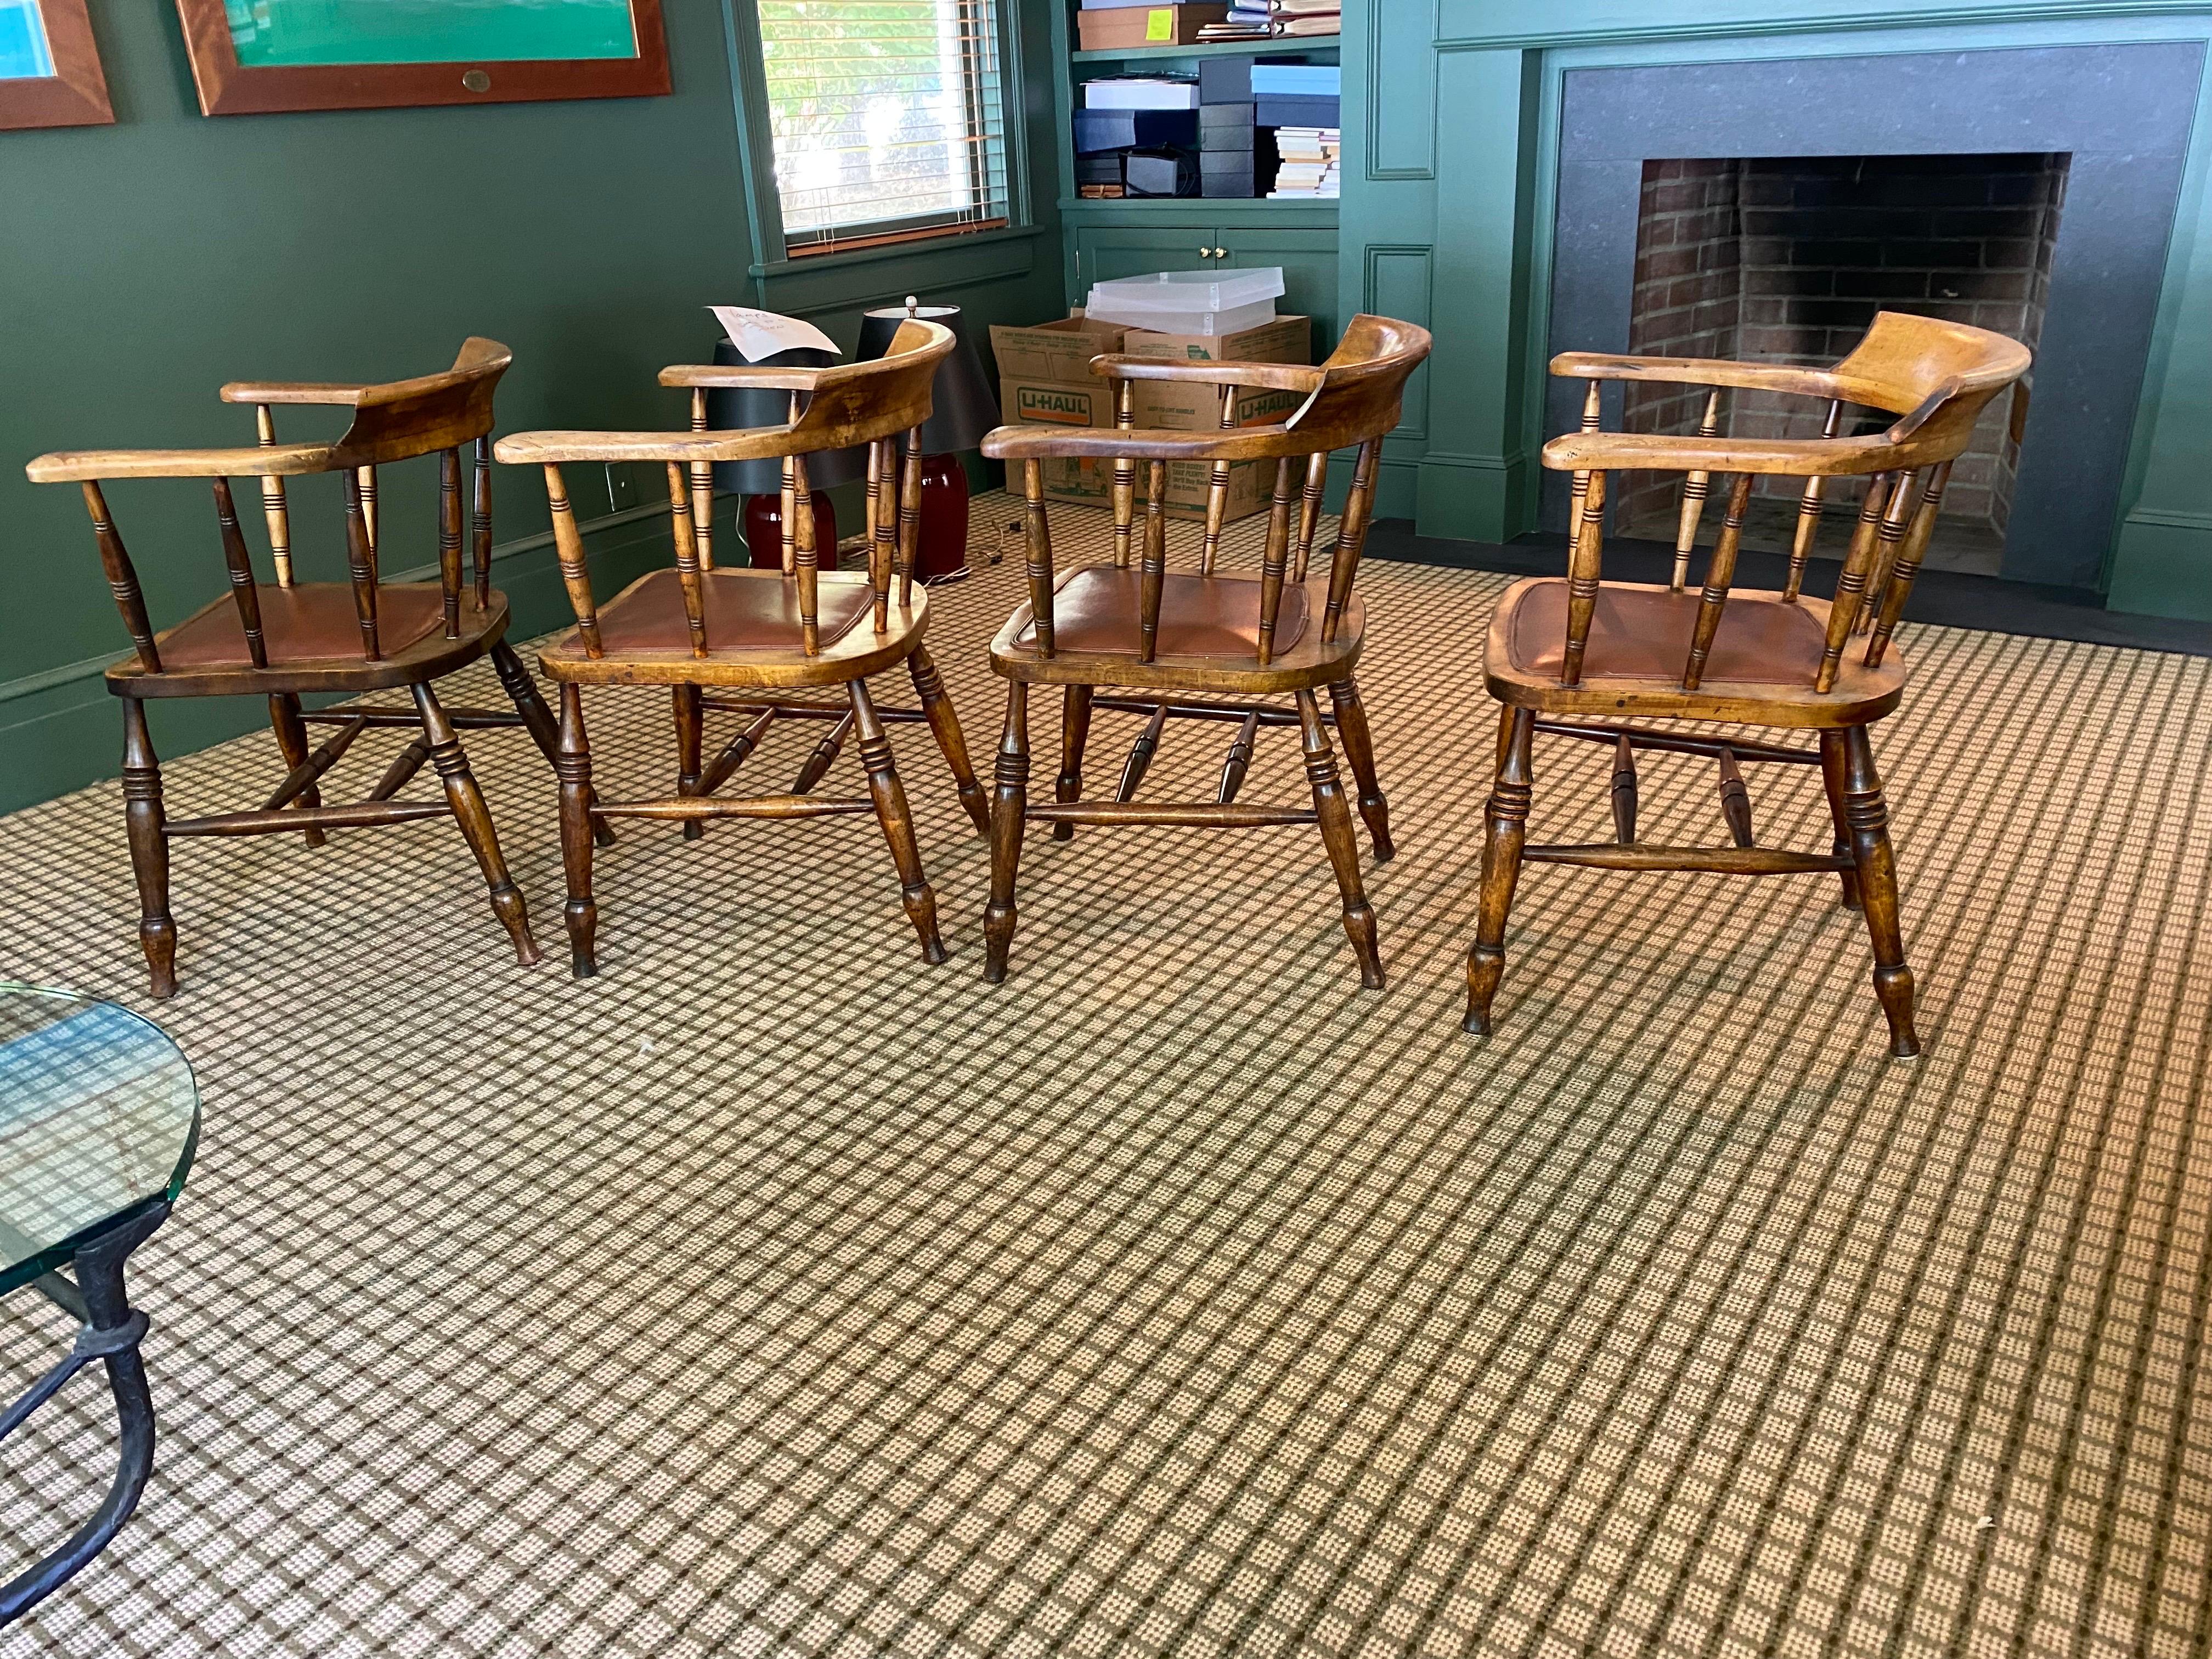 Set of four English birch tavern chairs.
Lovely worn rounded seat back chairs with beautifully turned spindles and legs, and a fantastic patina only time can bestow with a burgundy red leather seat. 

Measures: 24